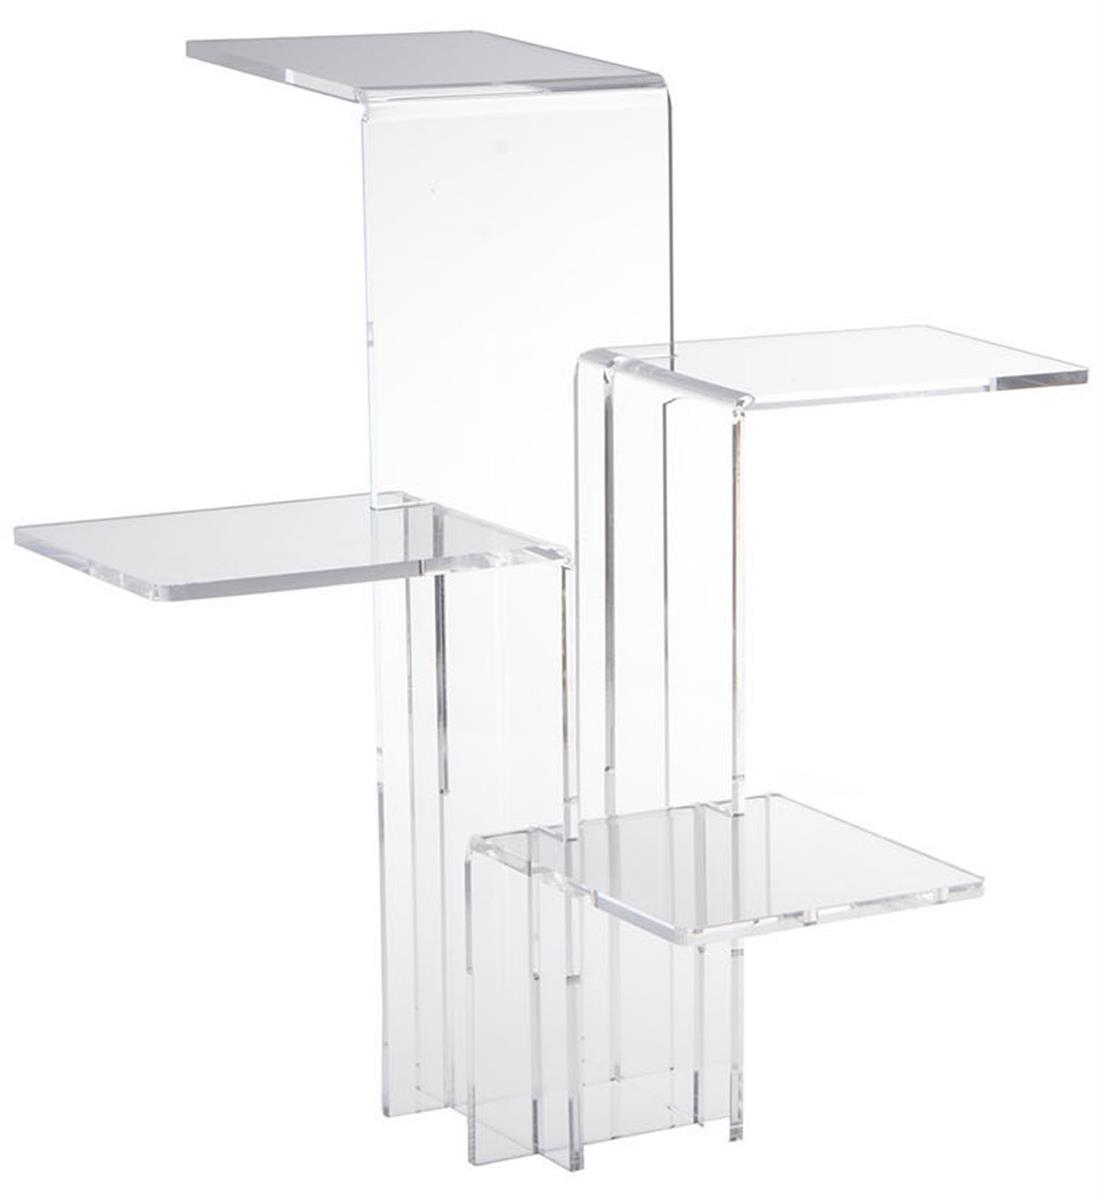 Risers for Counters Different U-shaped Display Stands Set of 5 Clear Acrylic 